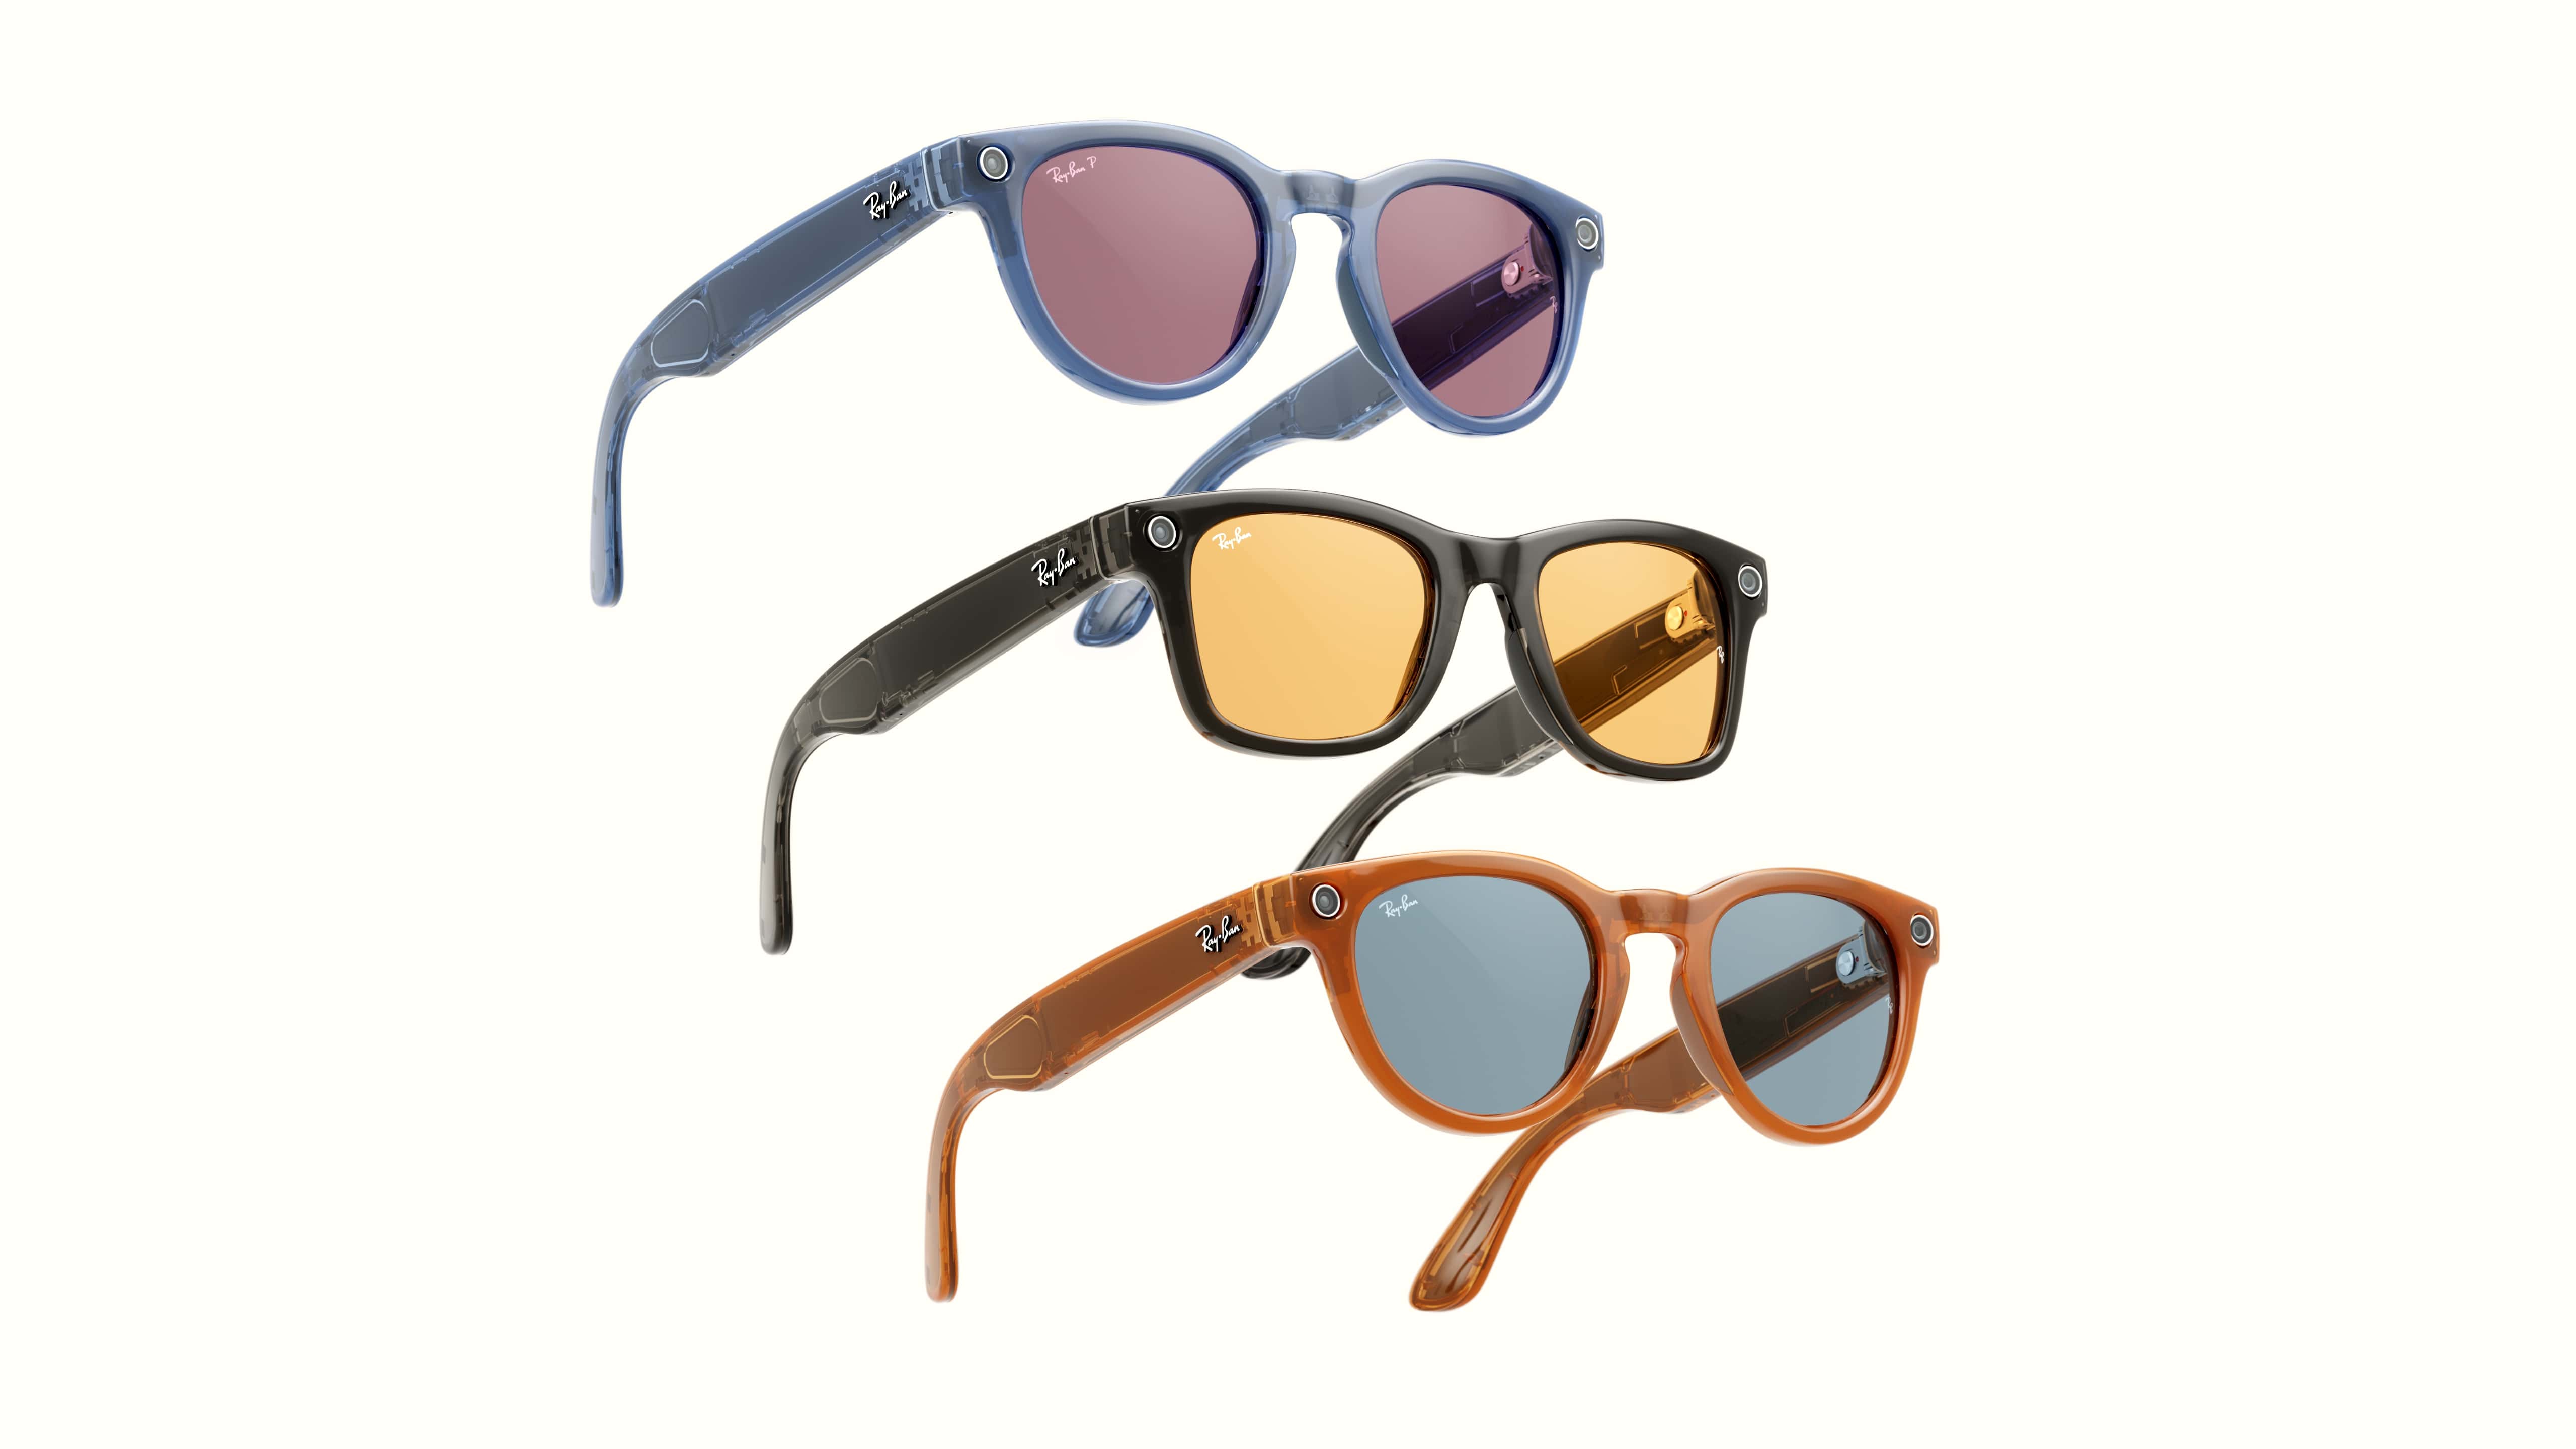 Three pairs of RayBan Meta Smart Glasses, one is blue with purple lenses, one is black with yellow lenses and the last is orange with blue lenses